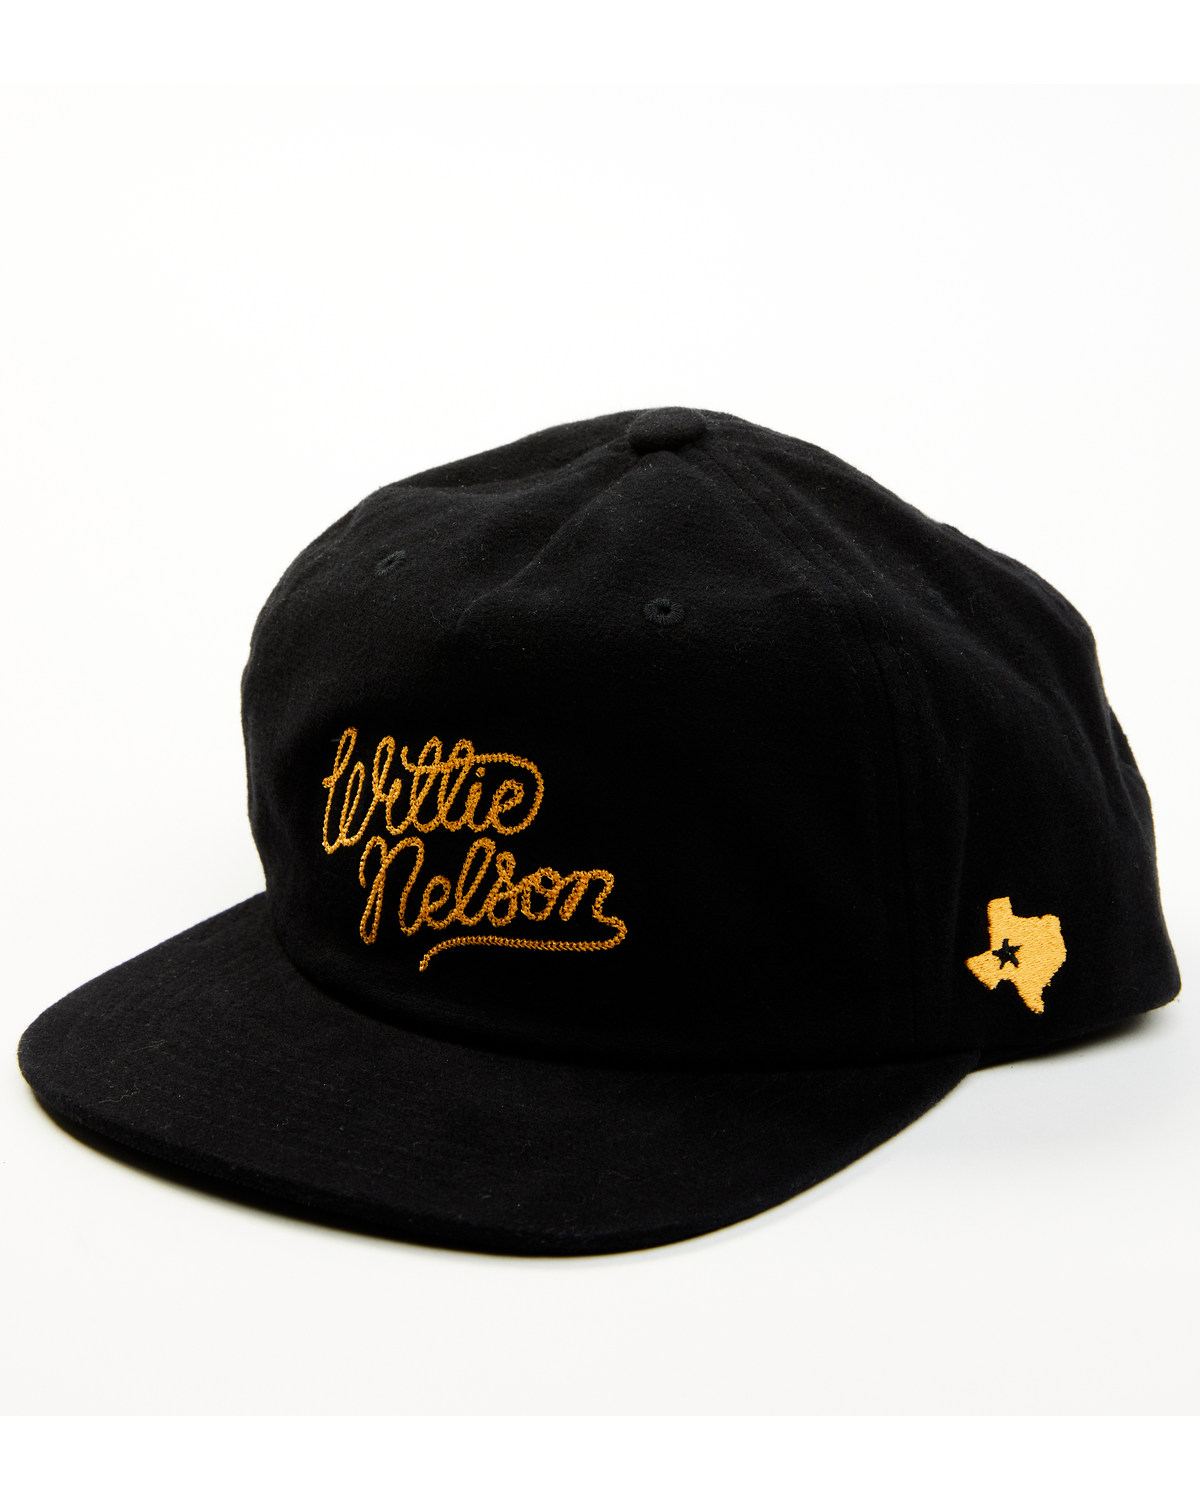 Brixton x Willie Nelson Men's Embroidered Ball Cap